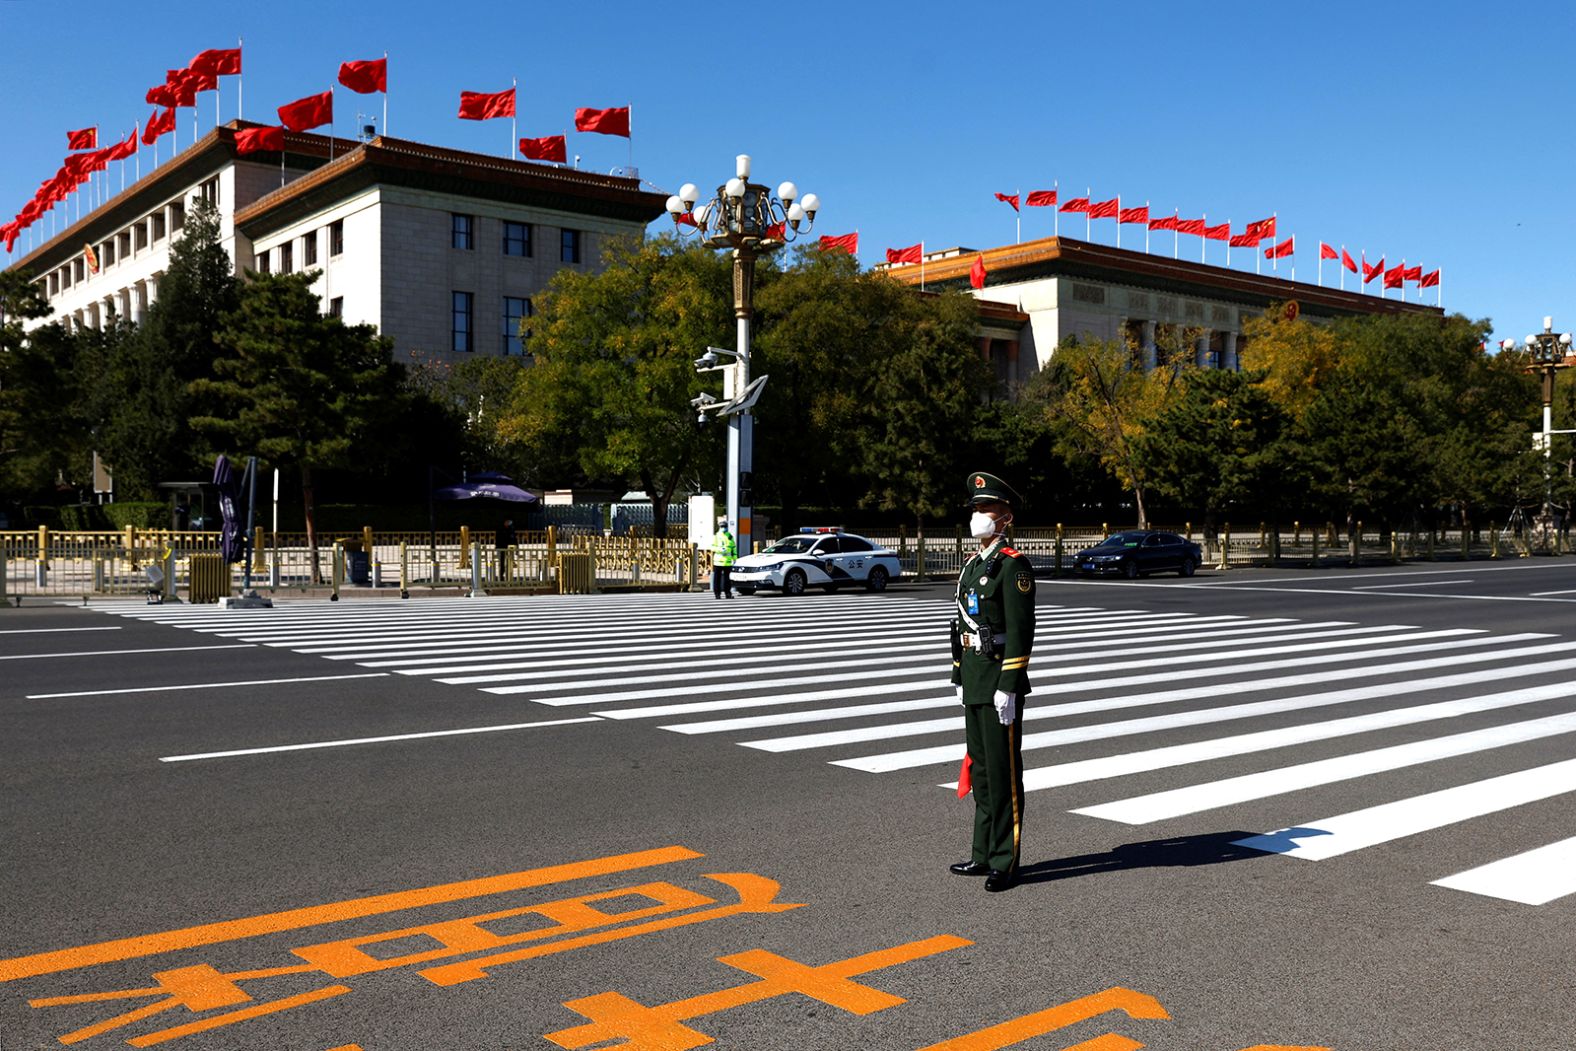 A paramilitary police officer stands guard outside the Great Hall of the People.